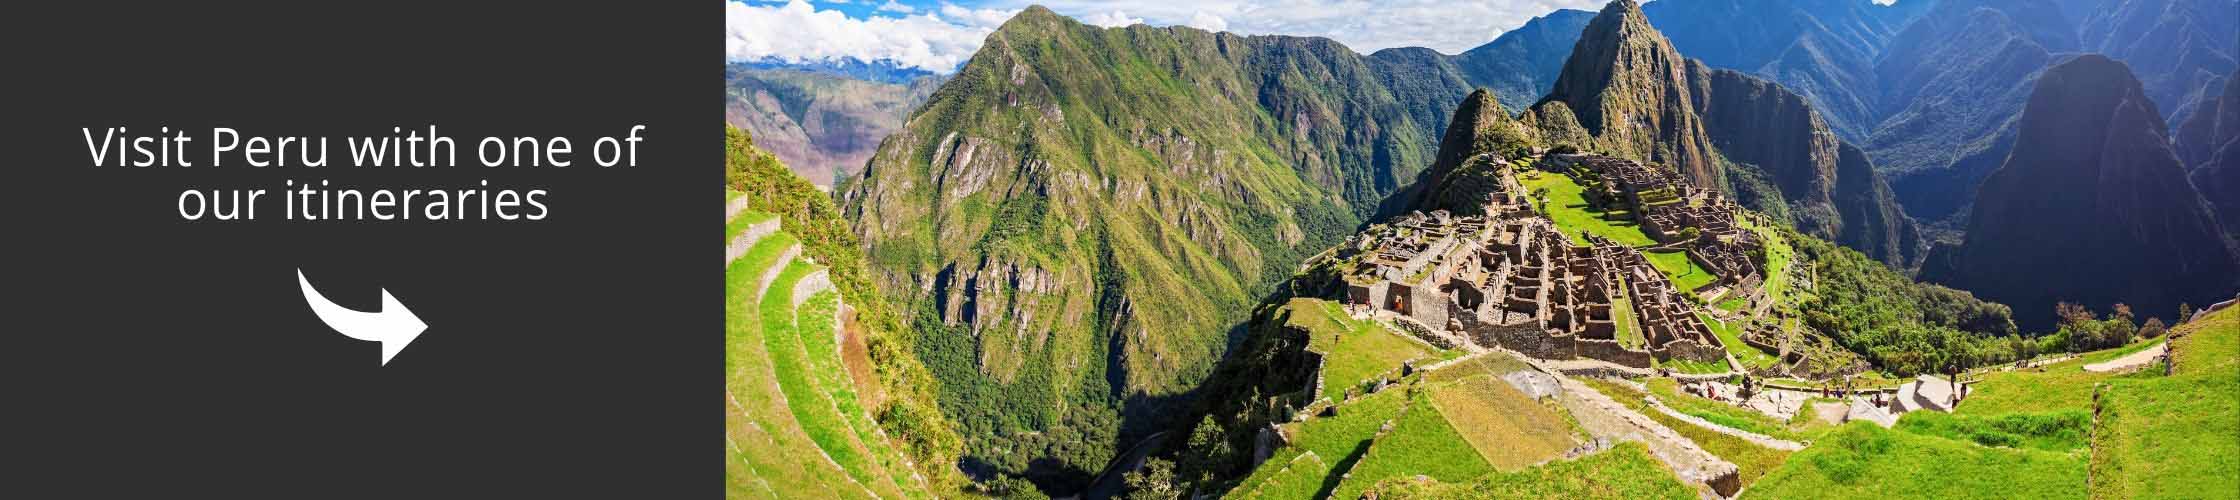 Visit Peru with one of our itineraries